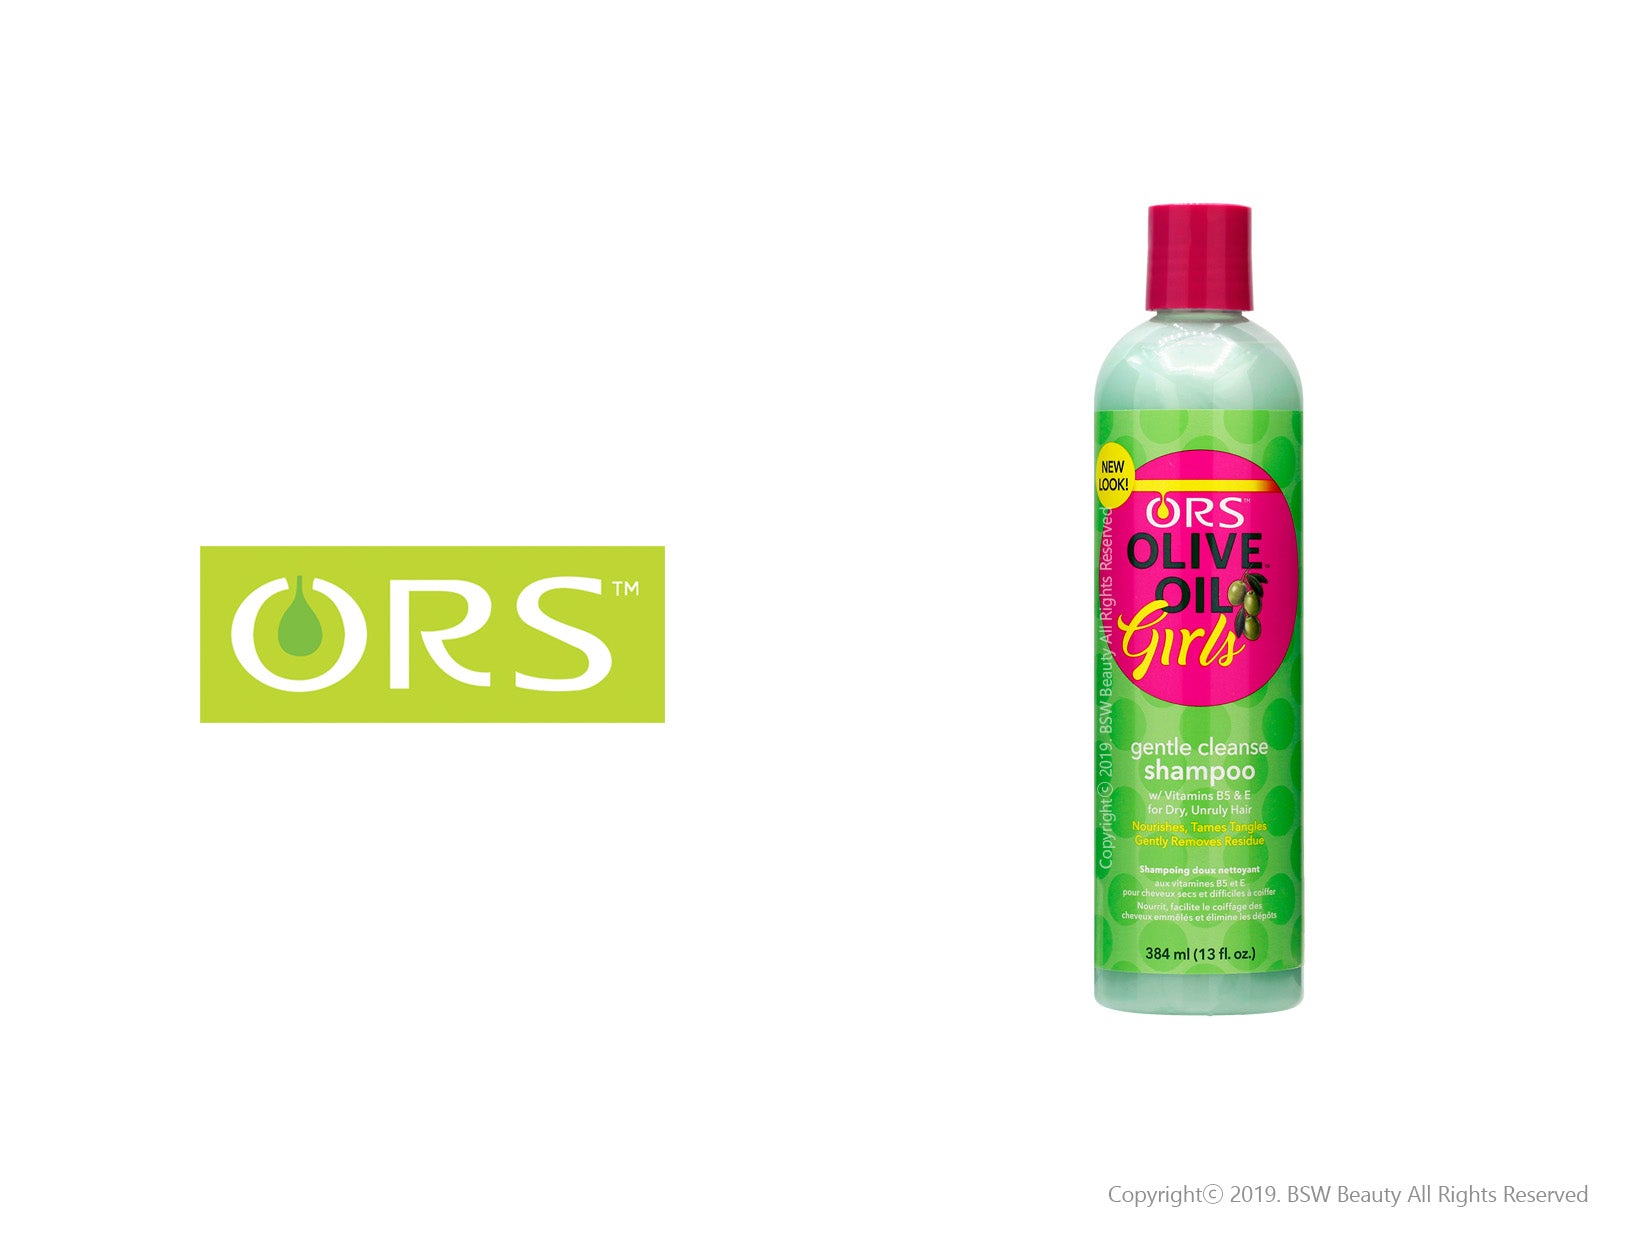 ORS OLIVE OIL GIRLS GENTLE CLEANSE SHAMPOO 13oz